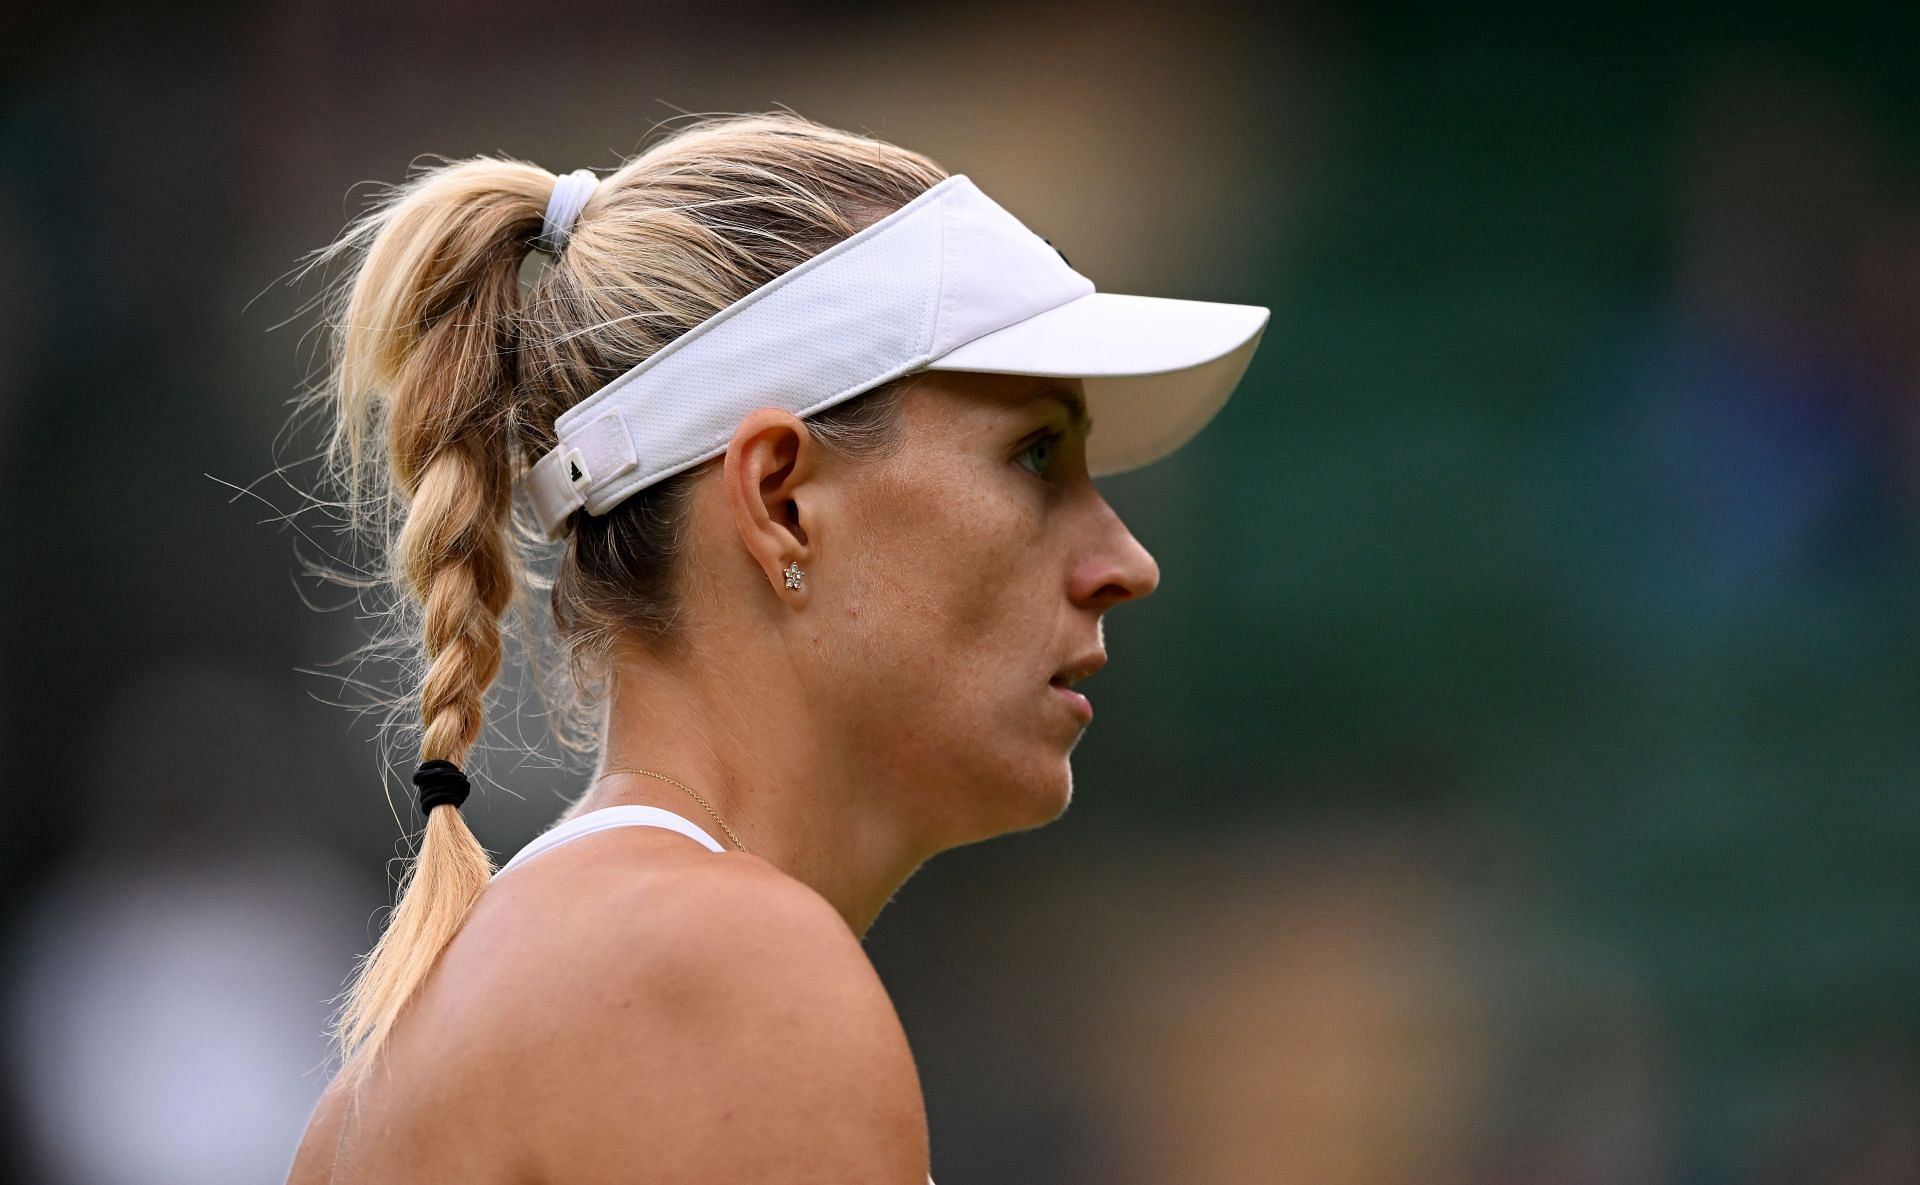 Angelique Kerber&rsquo;s last match was her third-round defeat to Elise Mertens at the Wimbledon Championships this year.